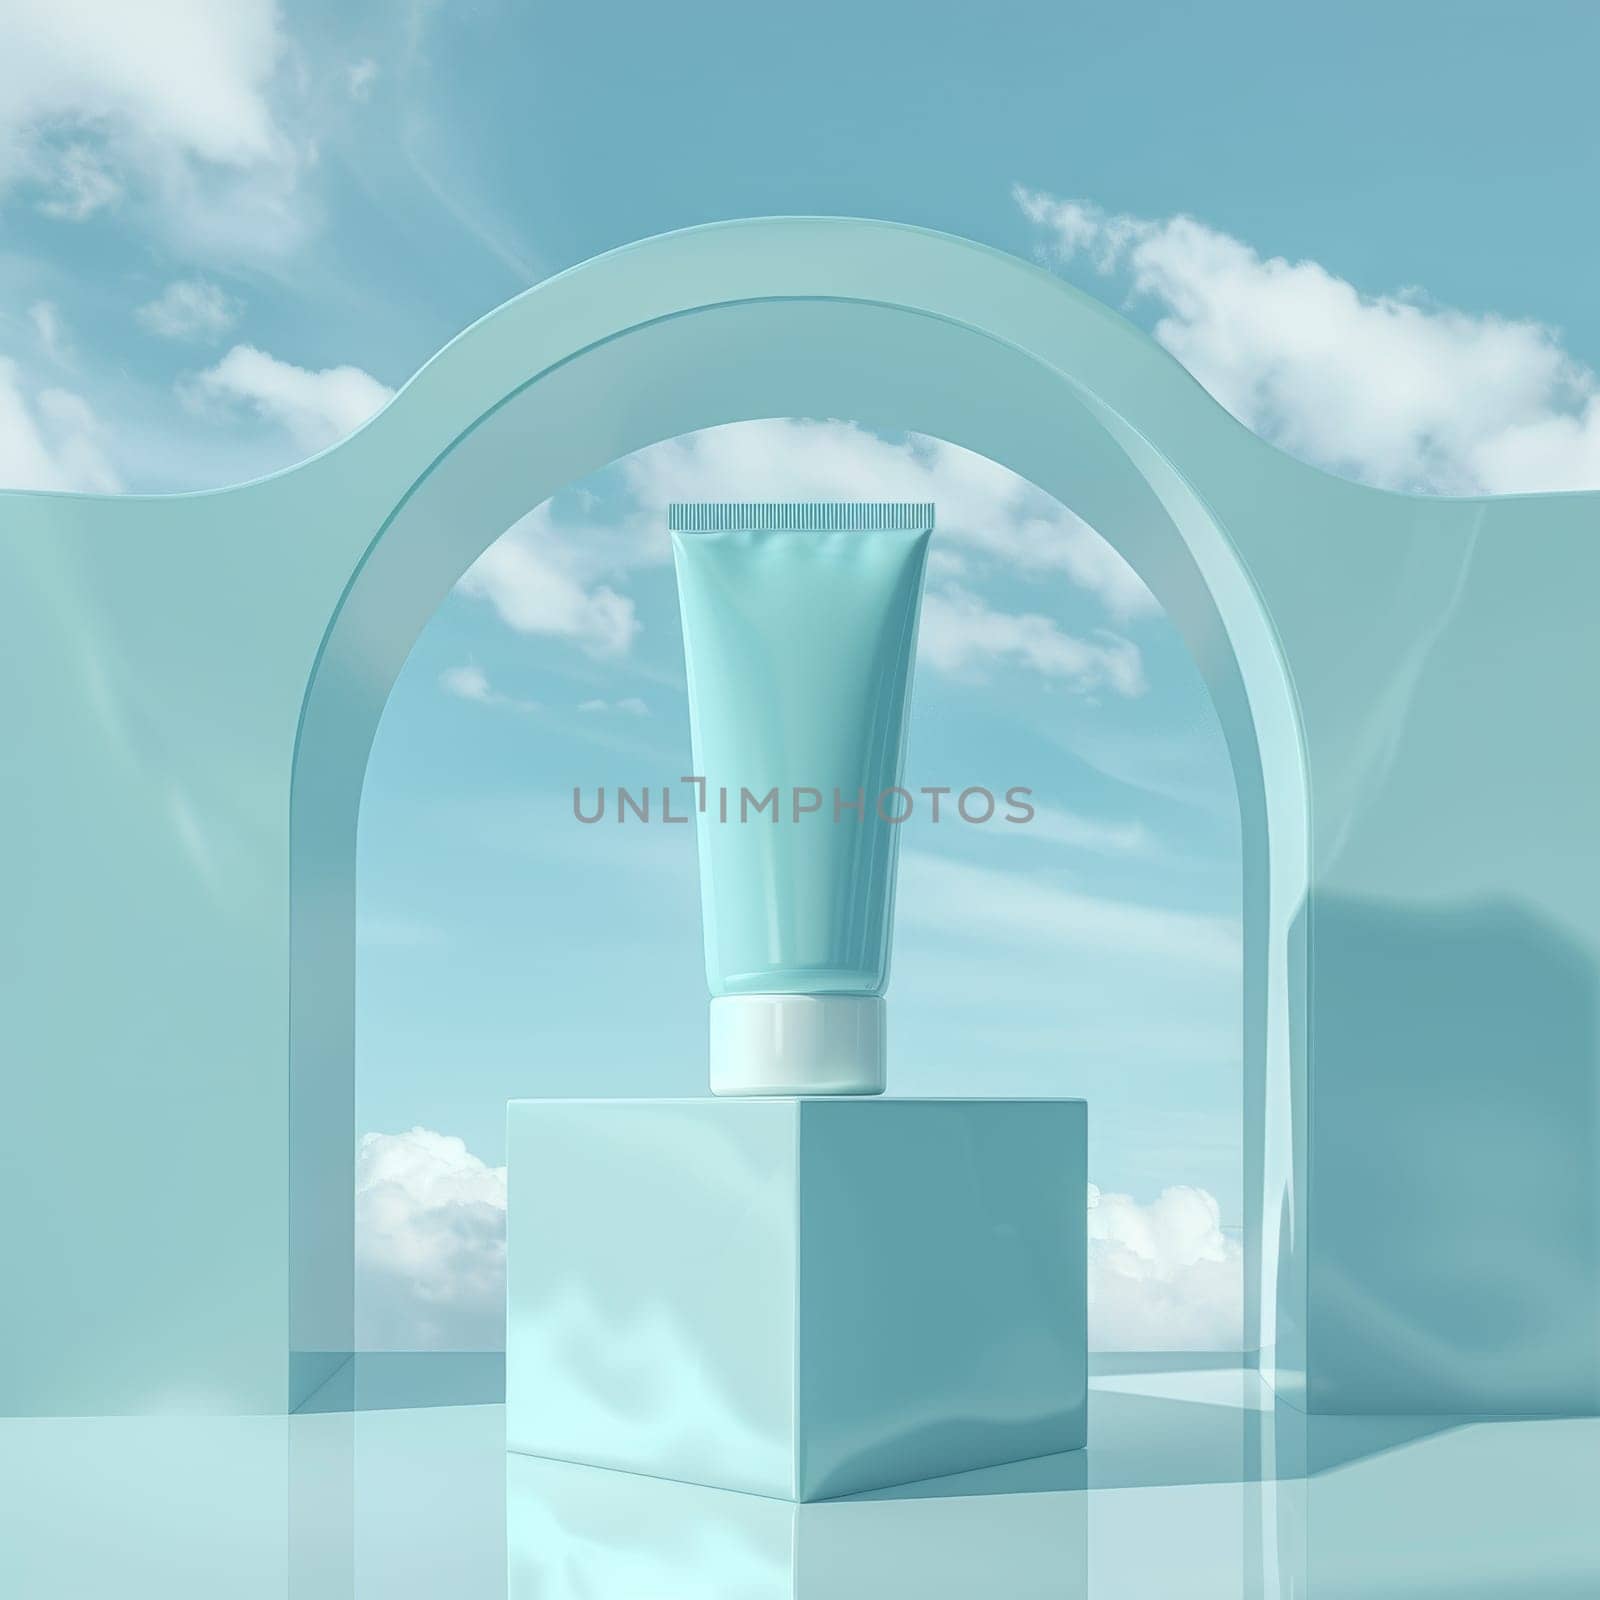 Luxury product cosmetic packaging with background.